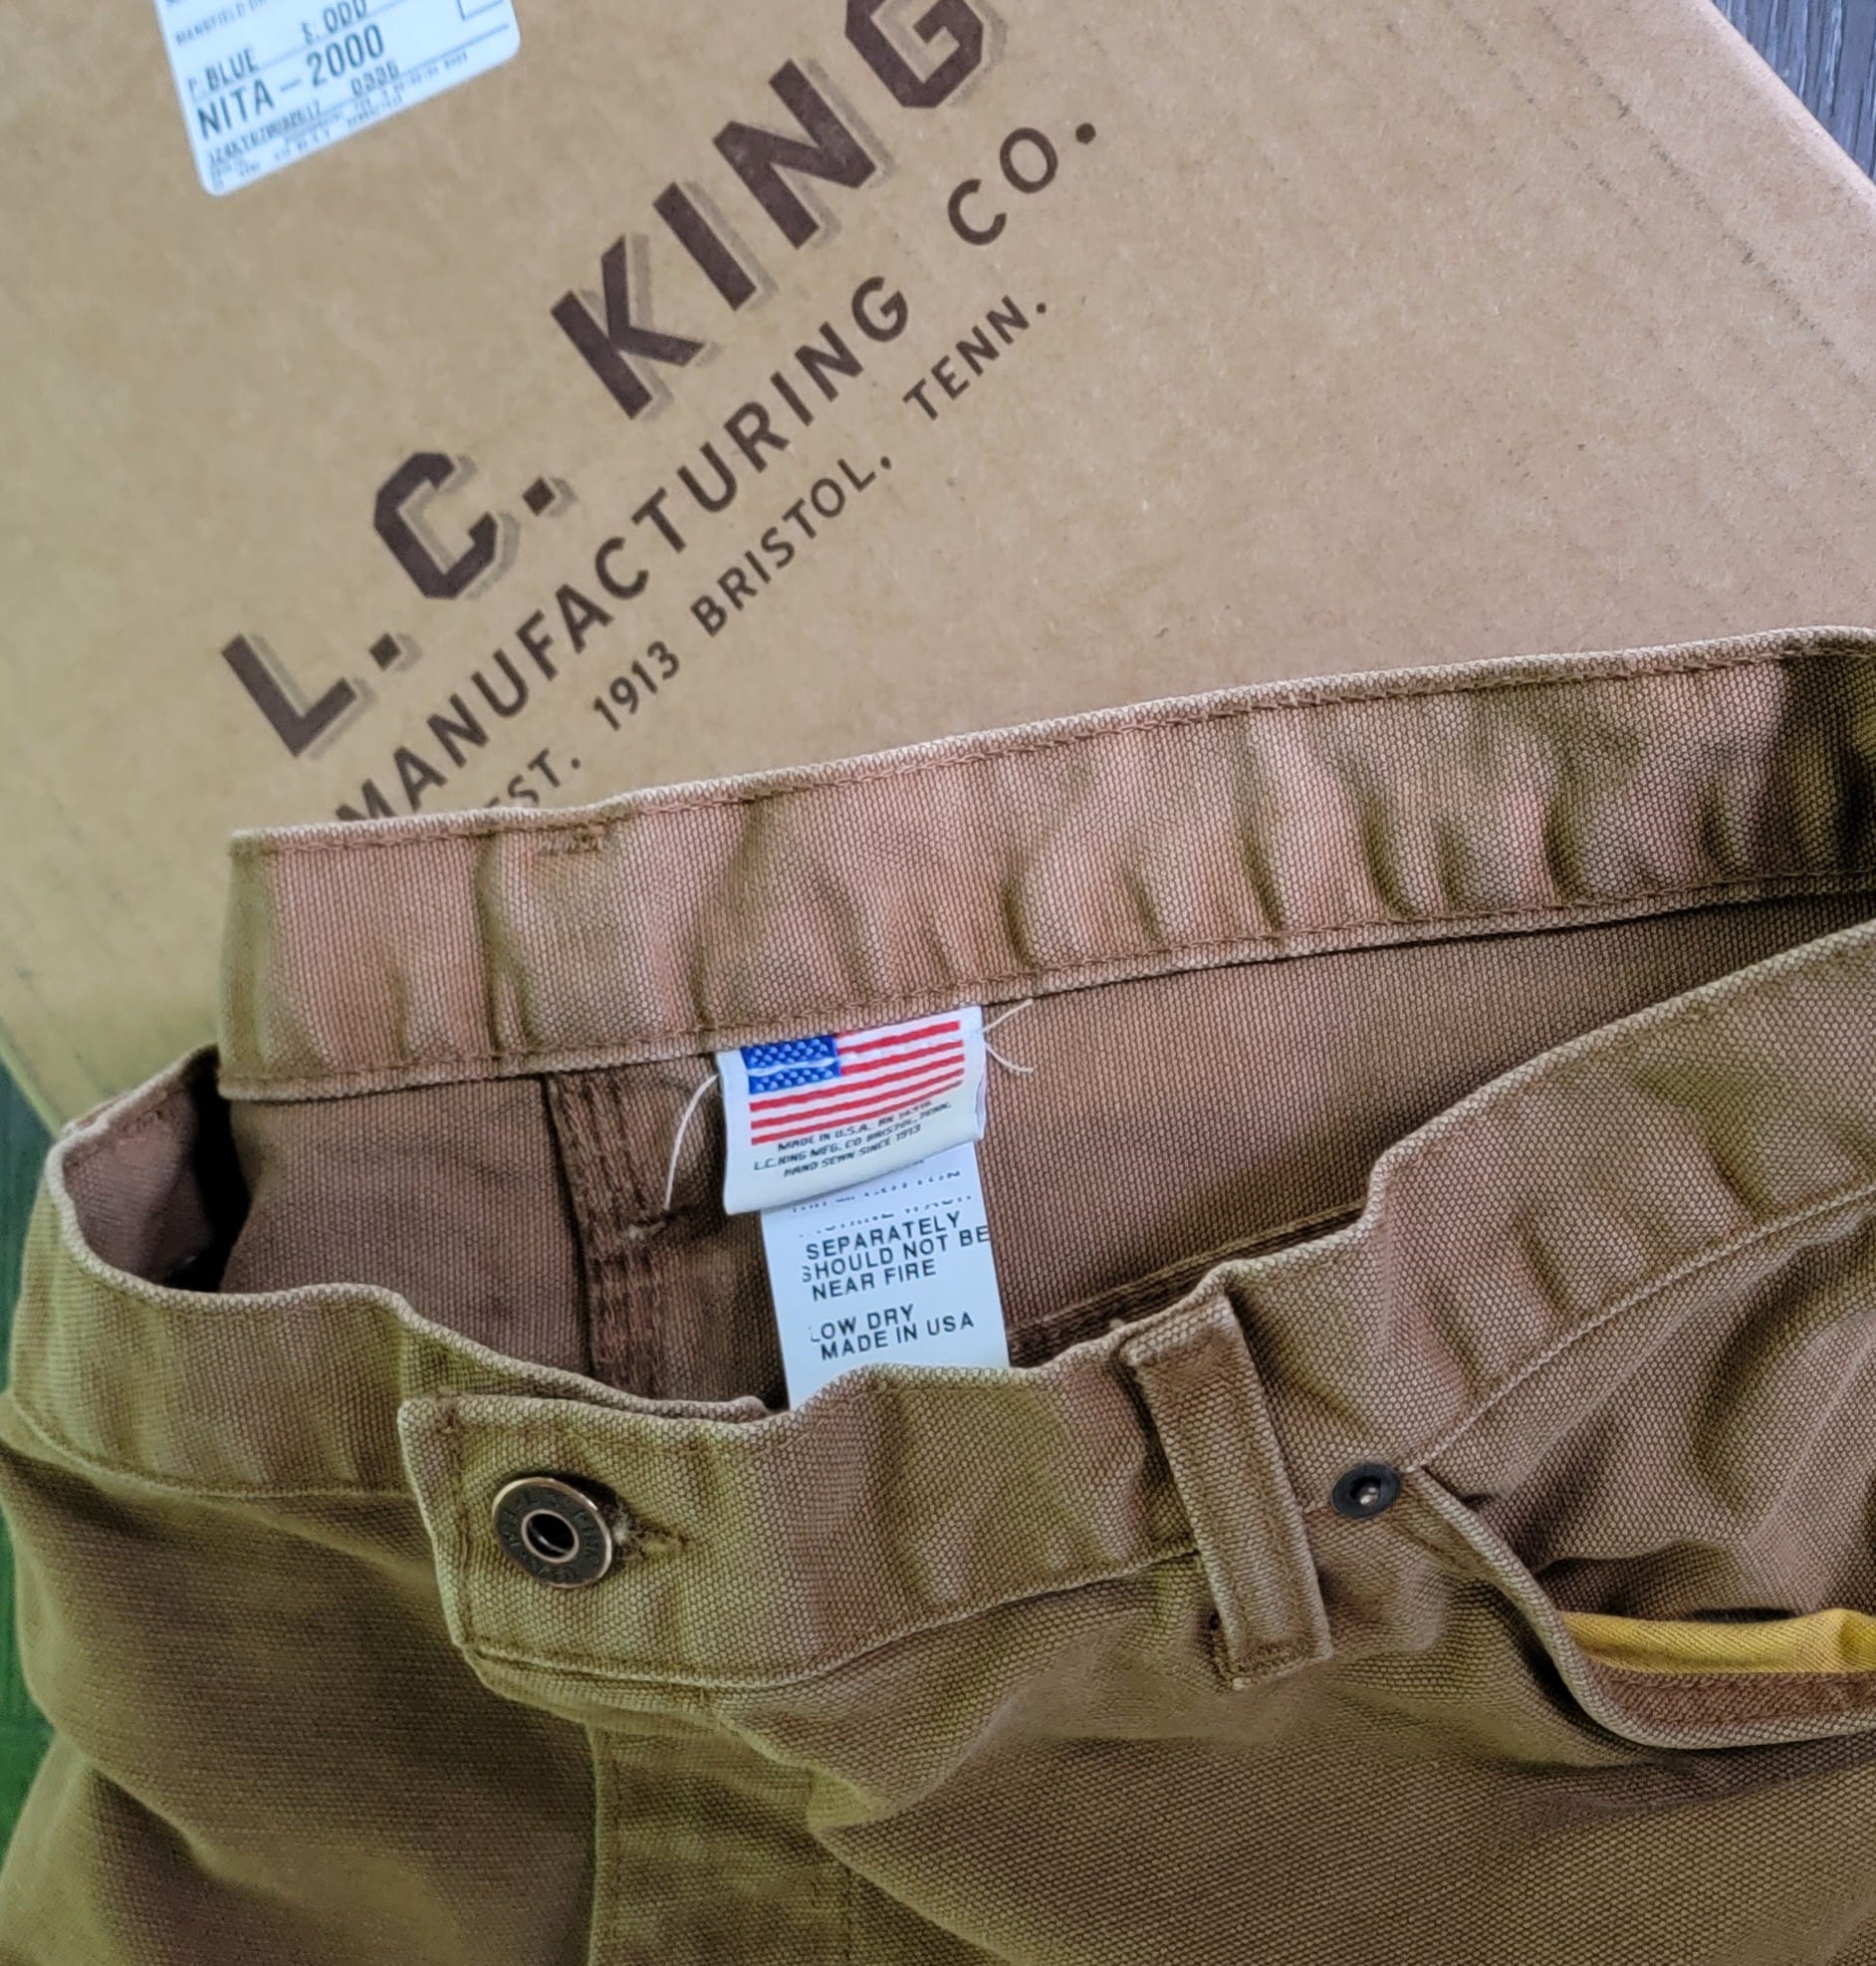 It's Time to Buy Brown Pants